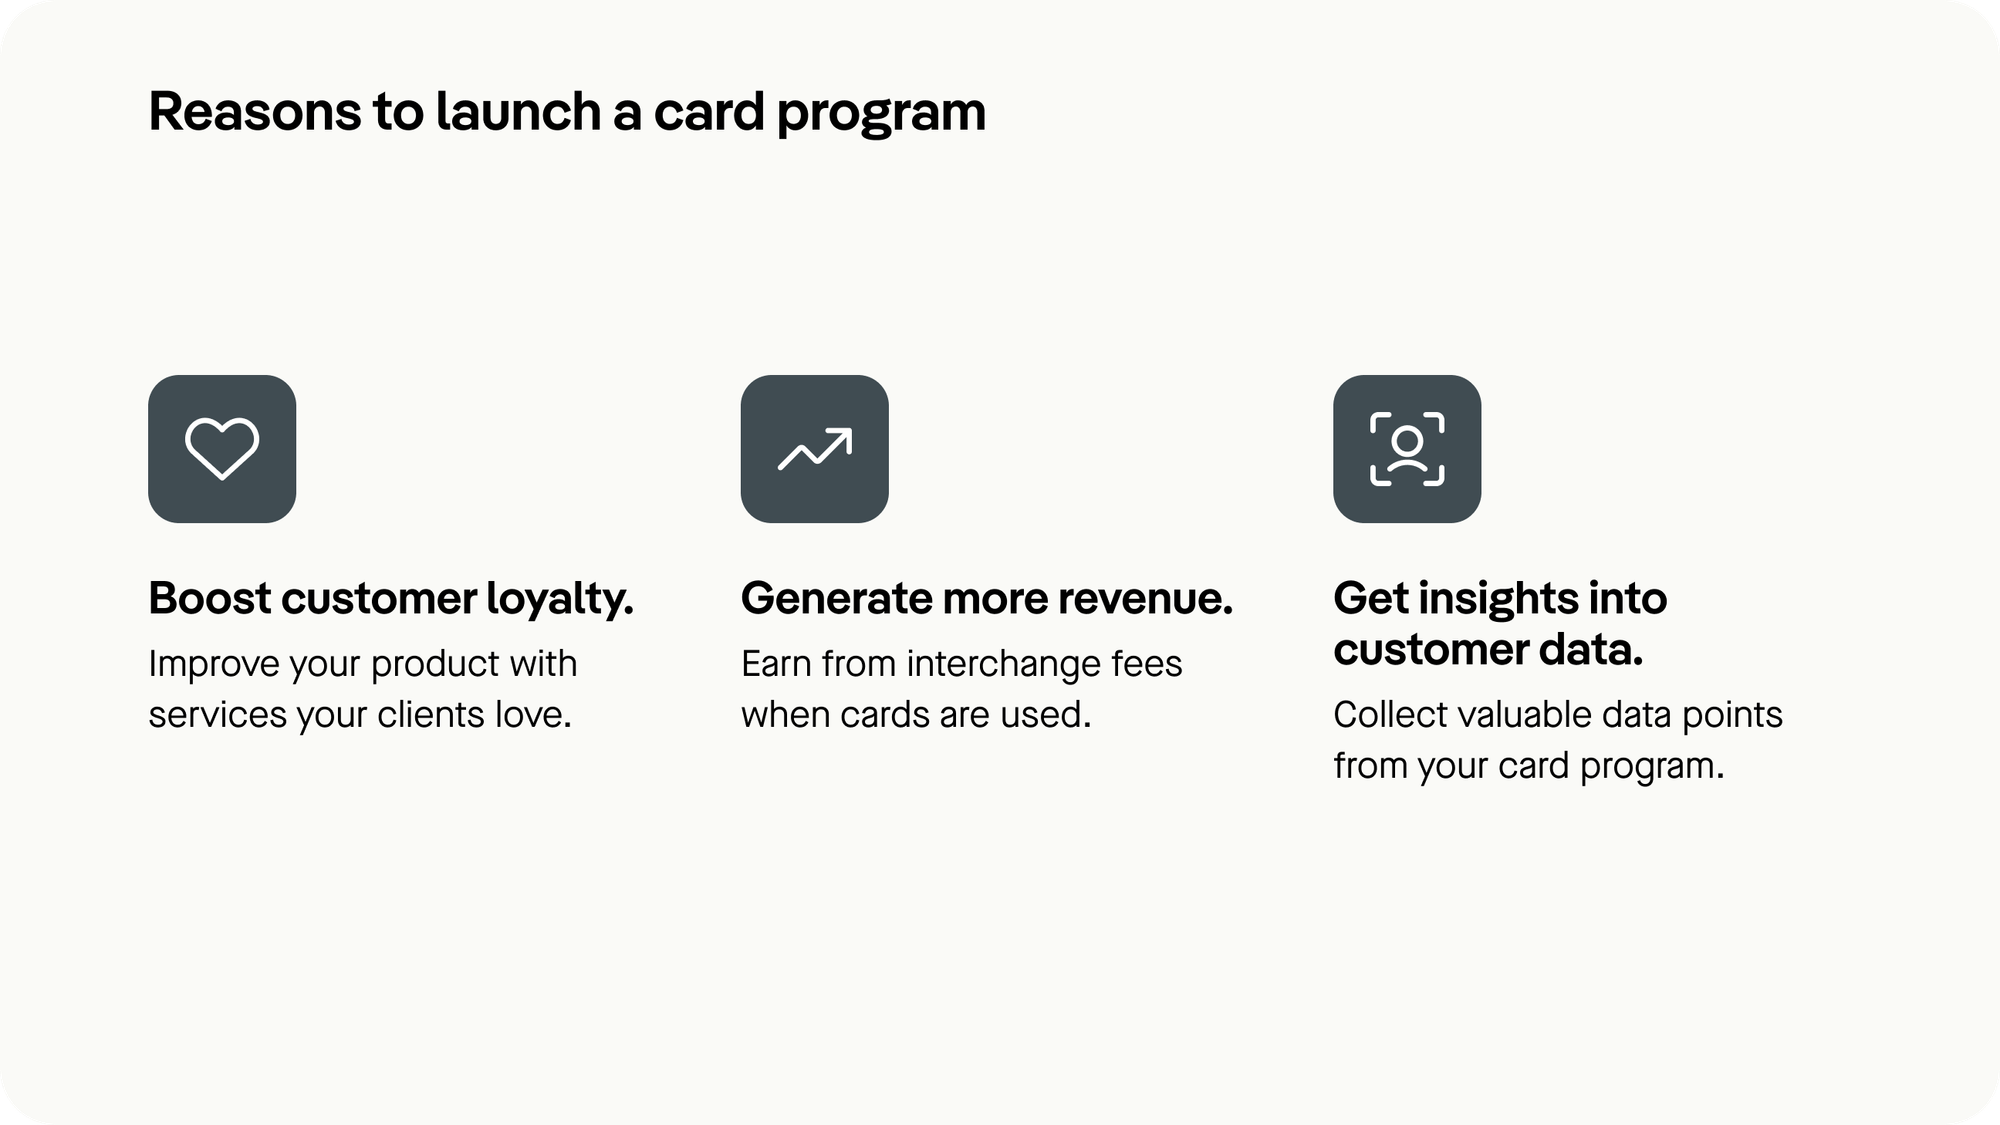 Reasons to launch a credit card program - Pliant